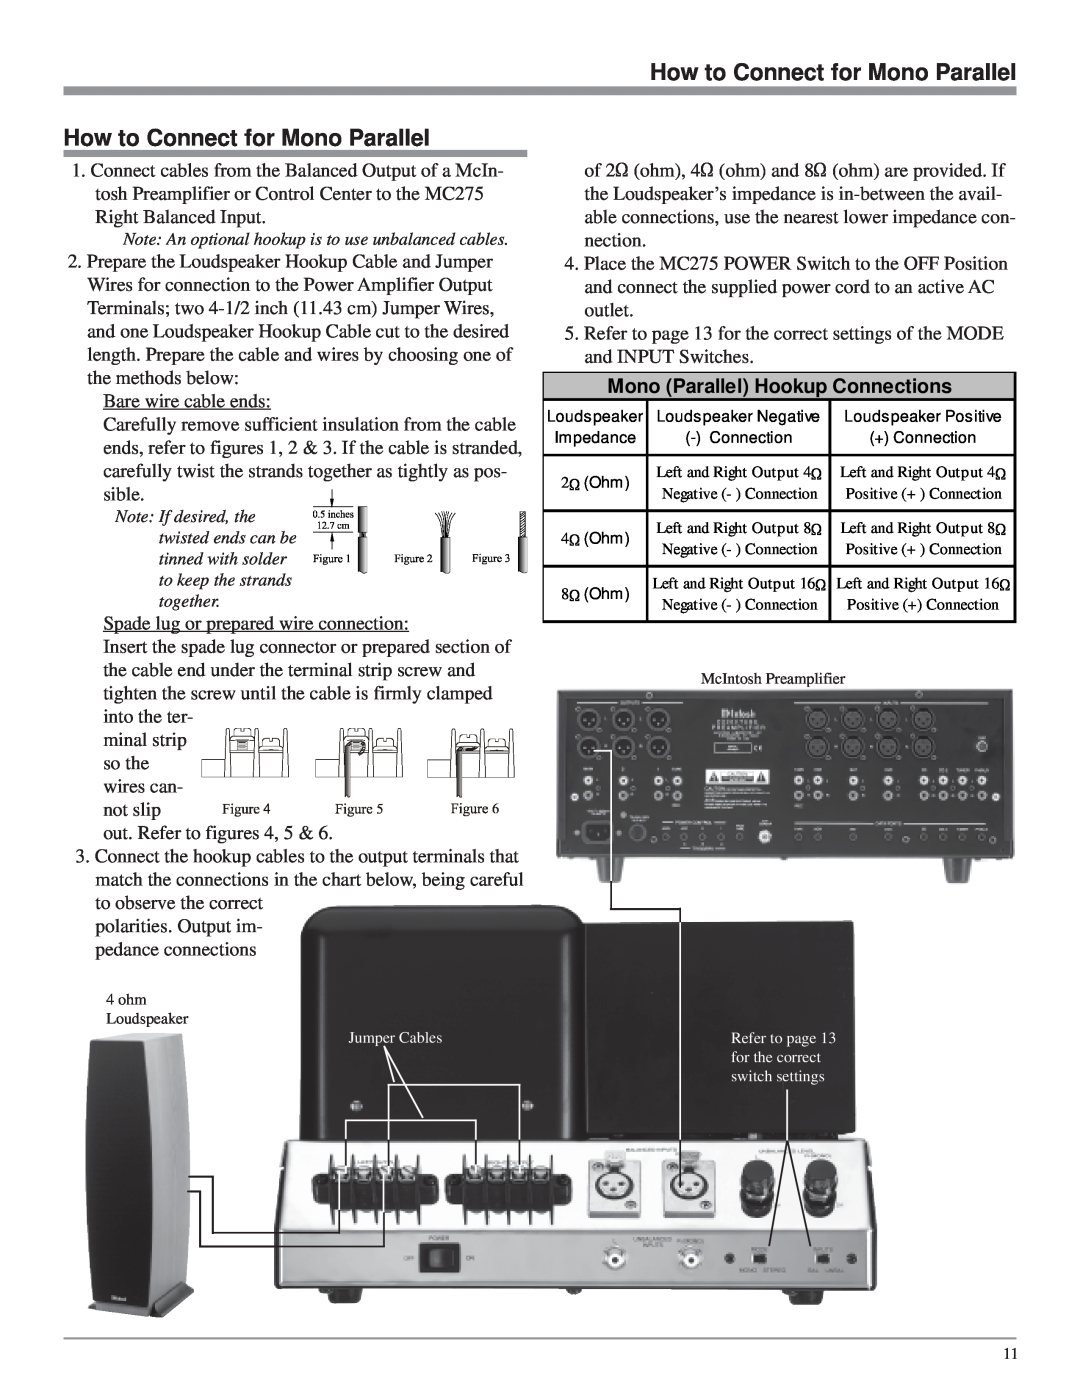 McIntosh MC275 owner manual How to Connect for Mono Parallel, Mono Parallel Hookup Connections 